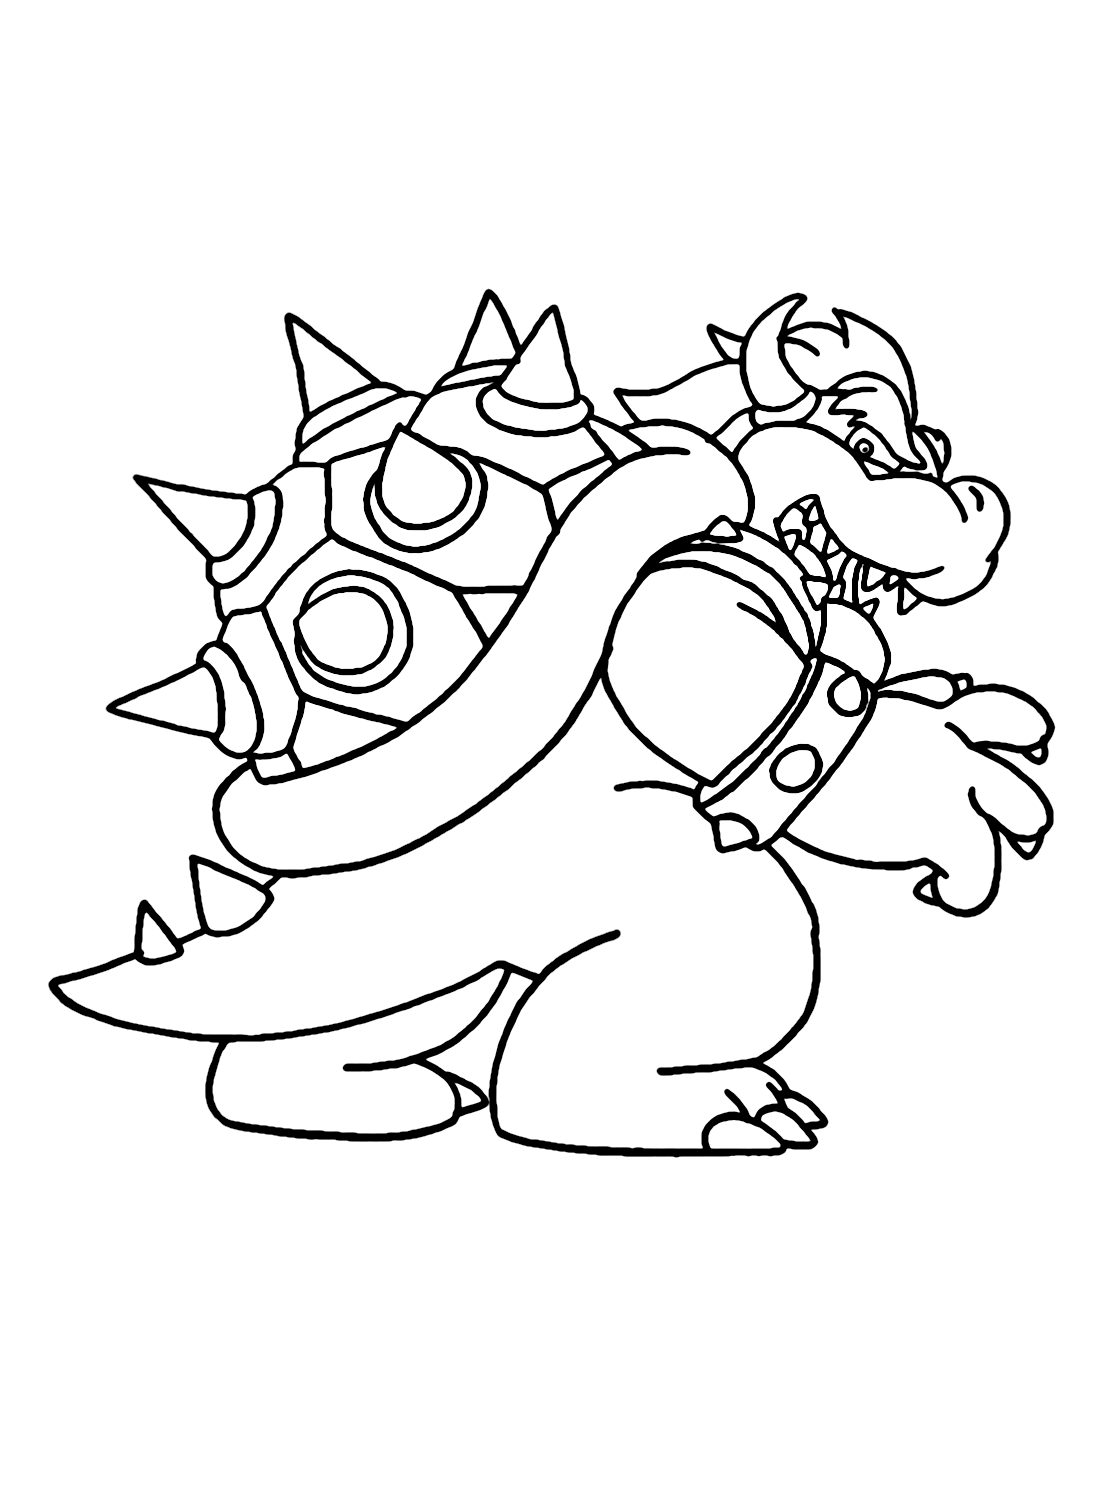 Bowser Mario Images Coloring Page